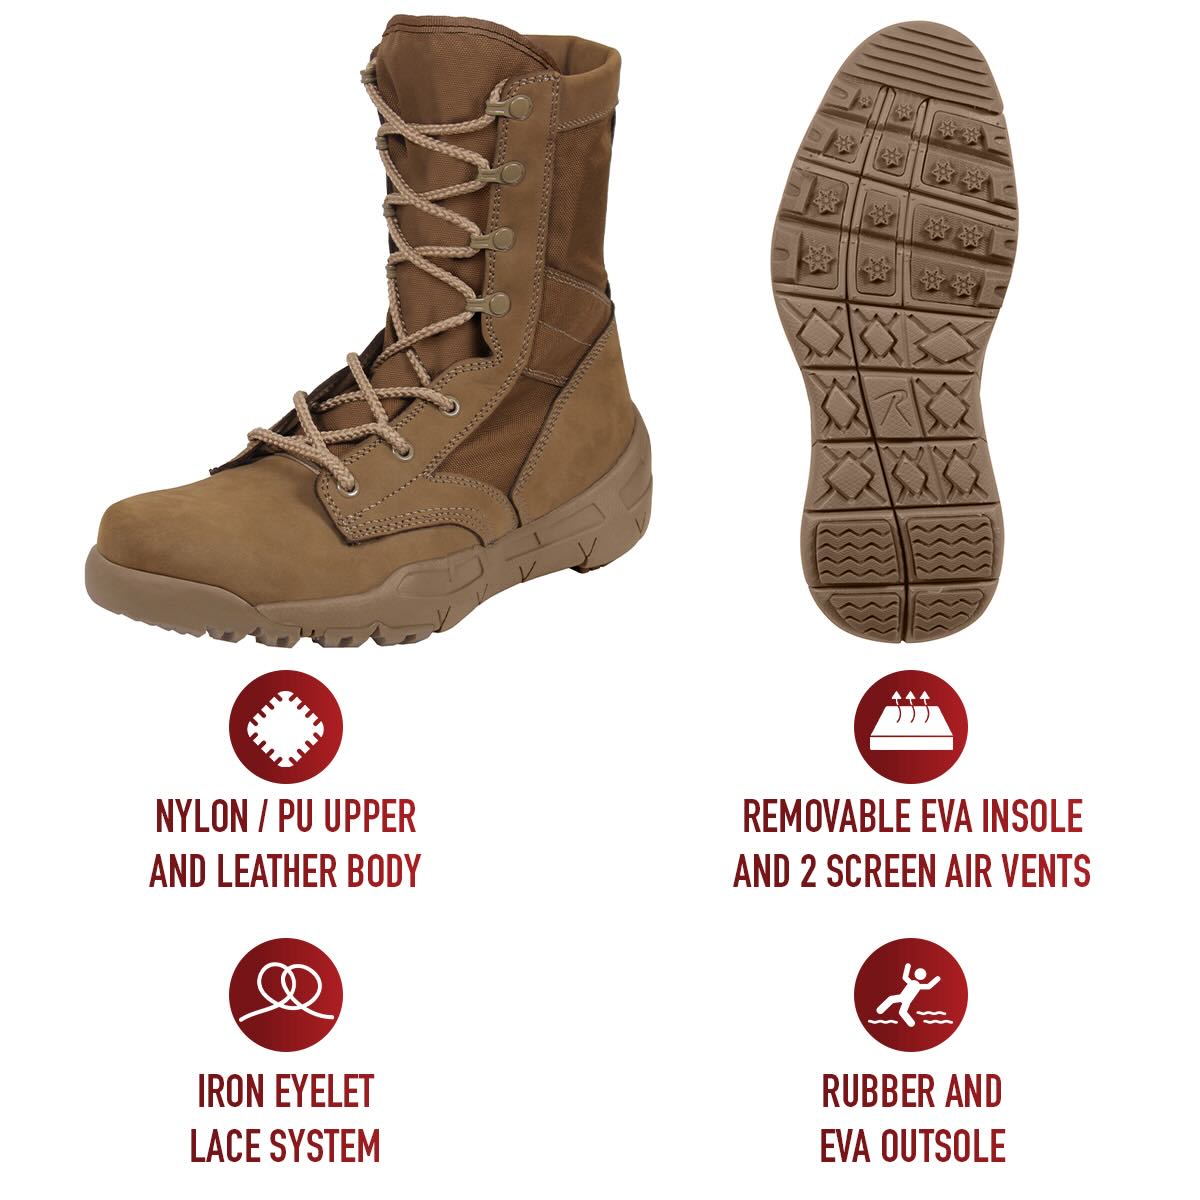 Boots - Rothco V Max Lightweight Tactical Boot